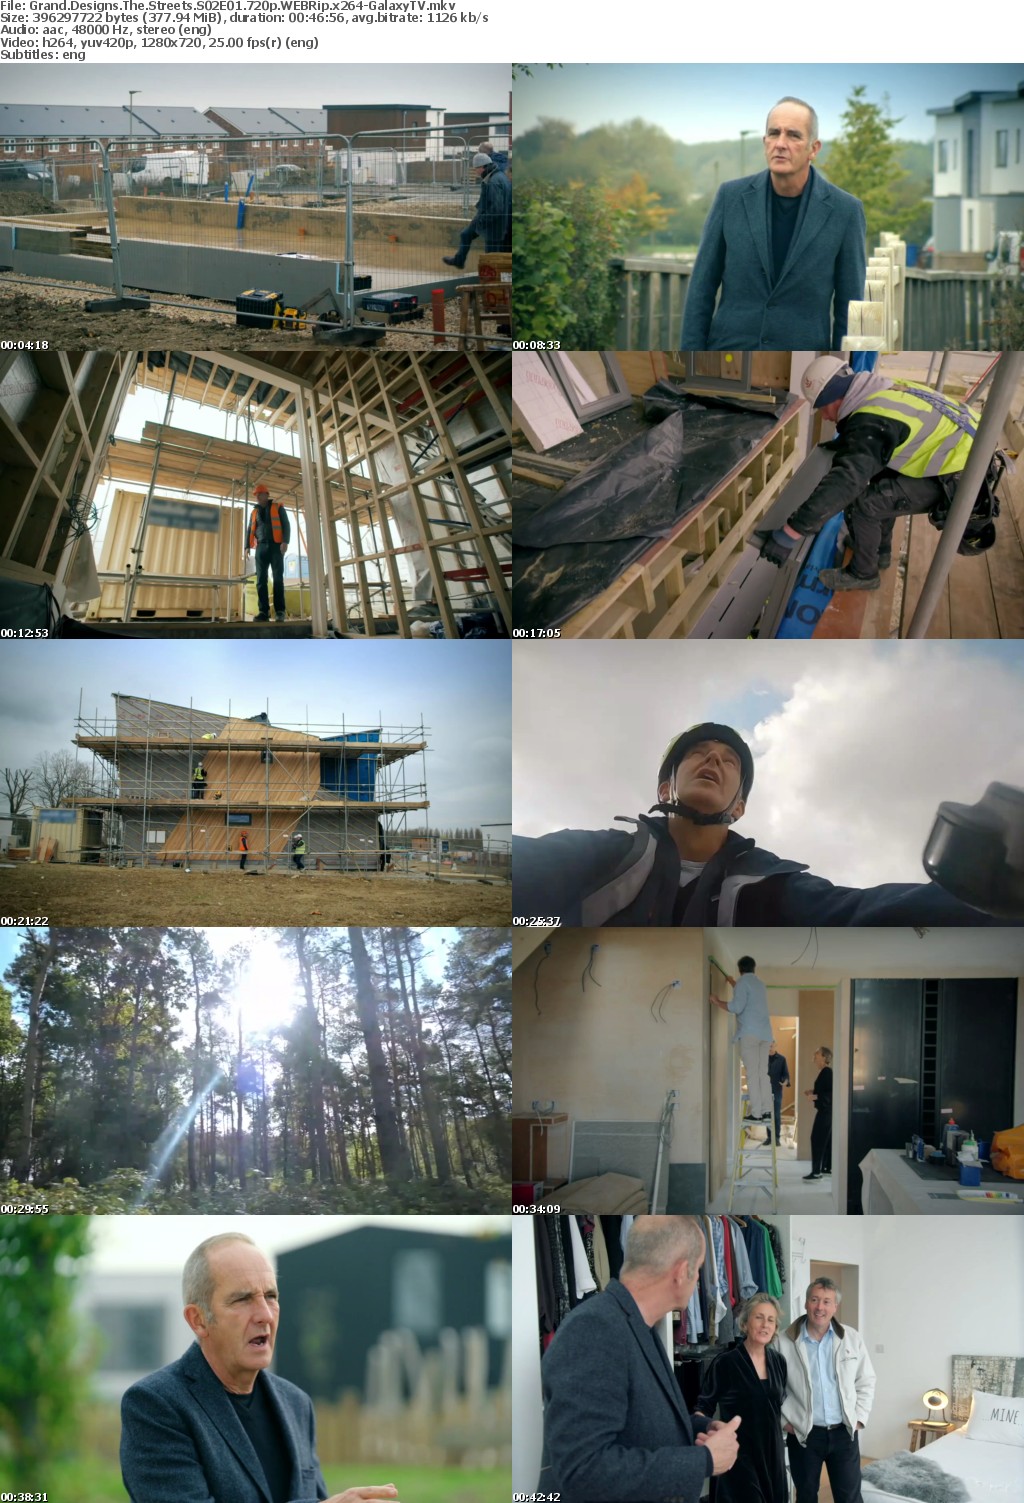 Grand Designs The Streets S02 COMPLETE 720p WEBRip x264-GalaxyTV